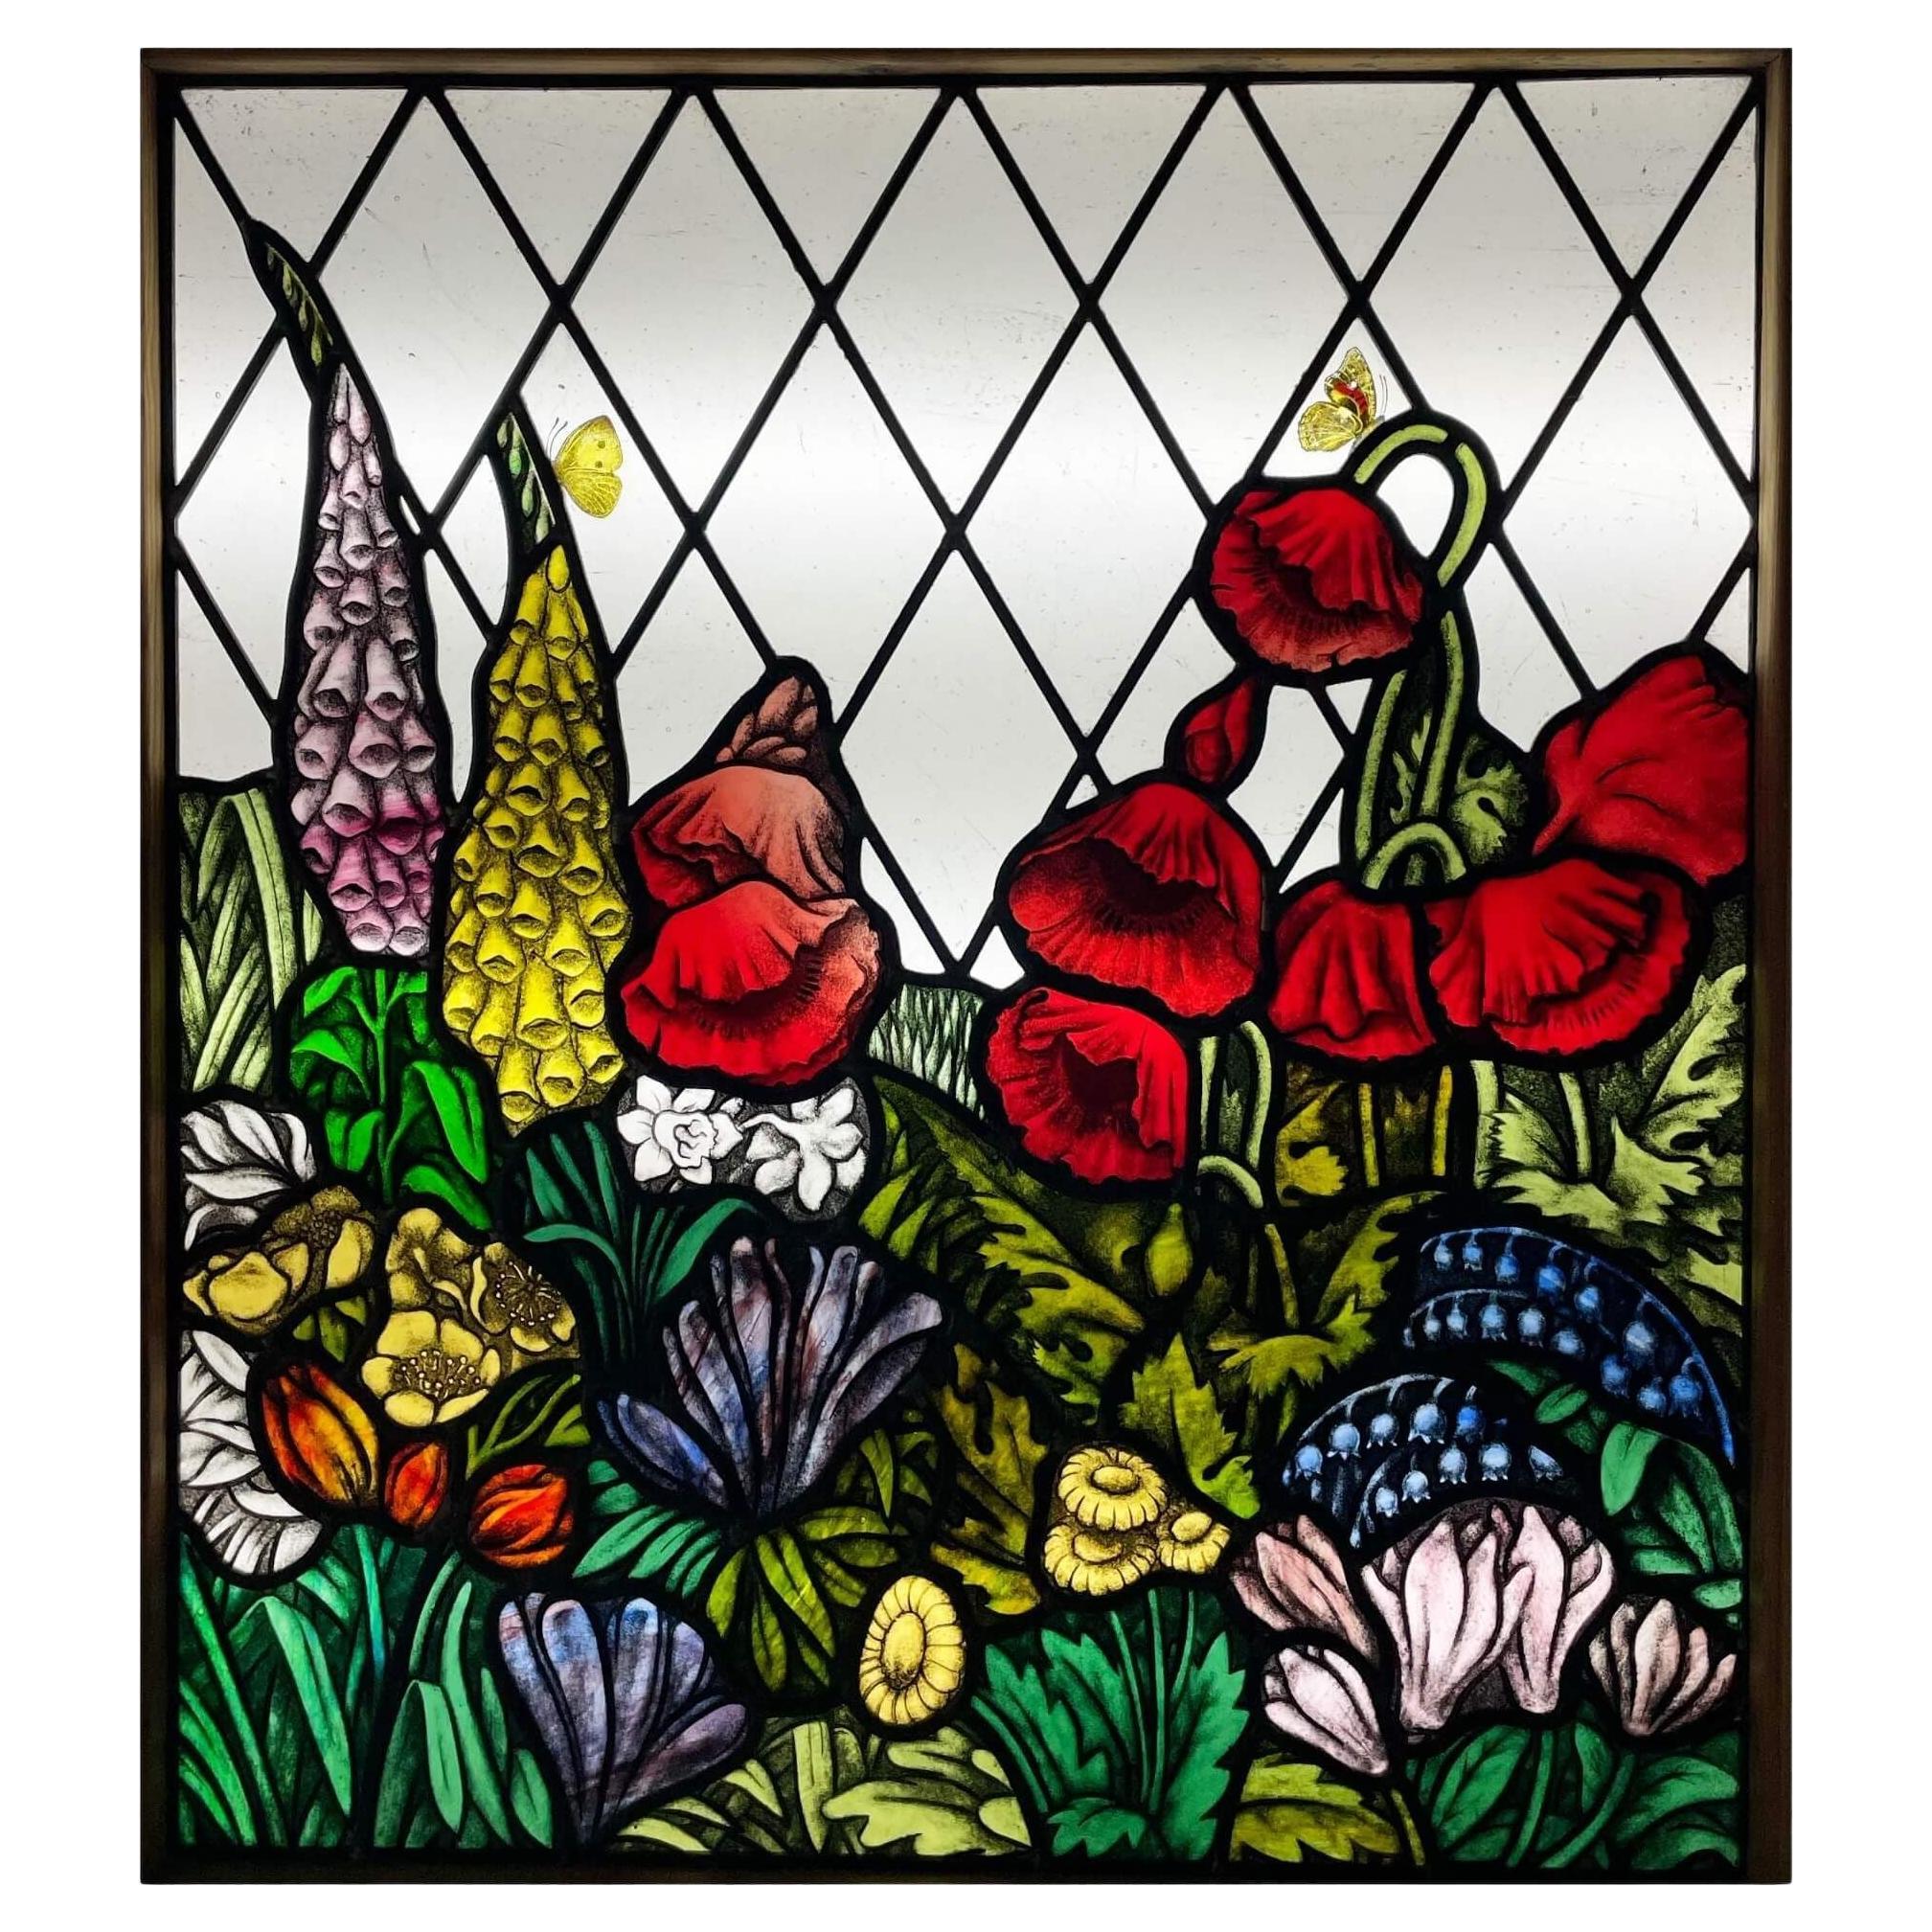 What is the purpose of leaded glass?